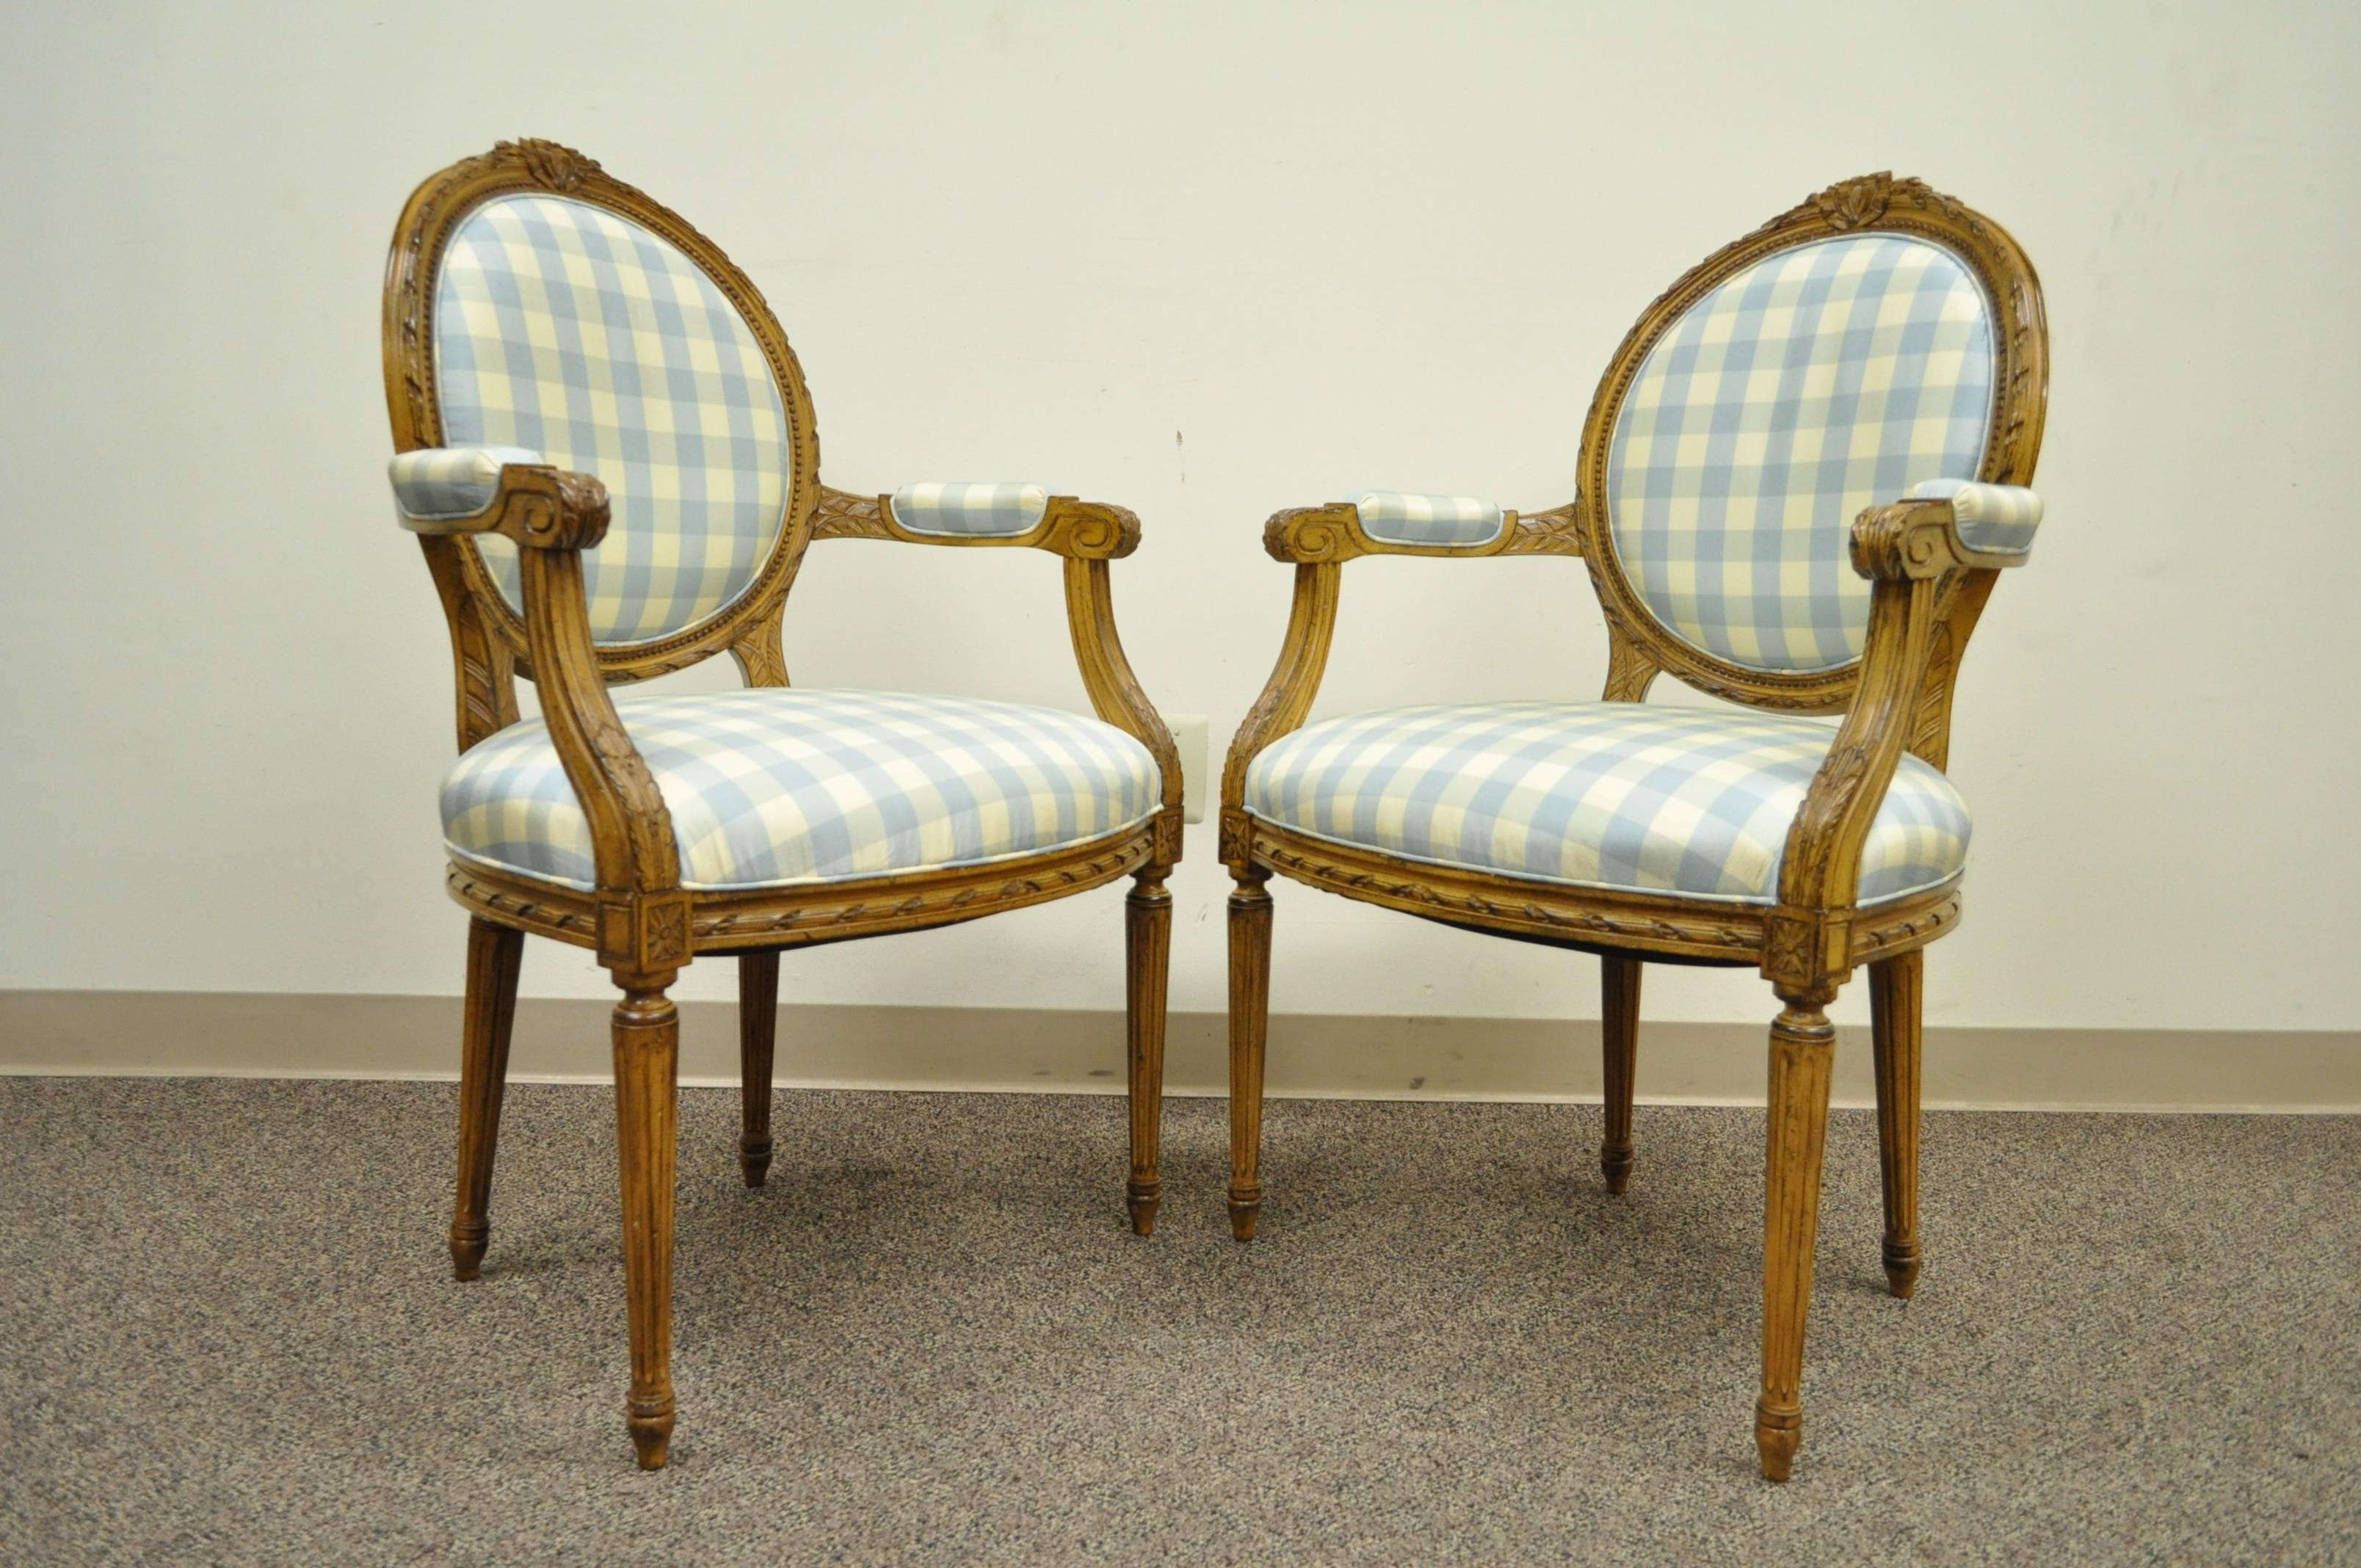 Quality pair of mid-20th century carved frame medallion back armchairs in the Louis XVI style. This classy pair features carvings throughout the frame including bow carved accents at the crest as well carvings to the medallion backs, skirts and